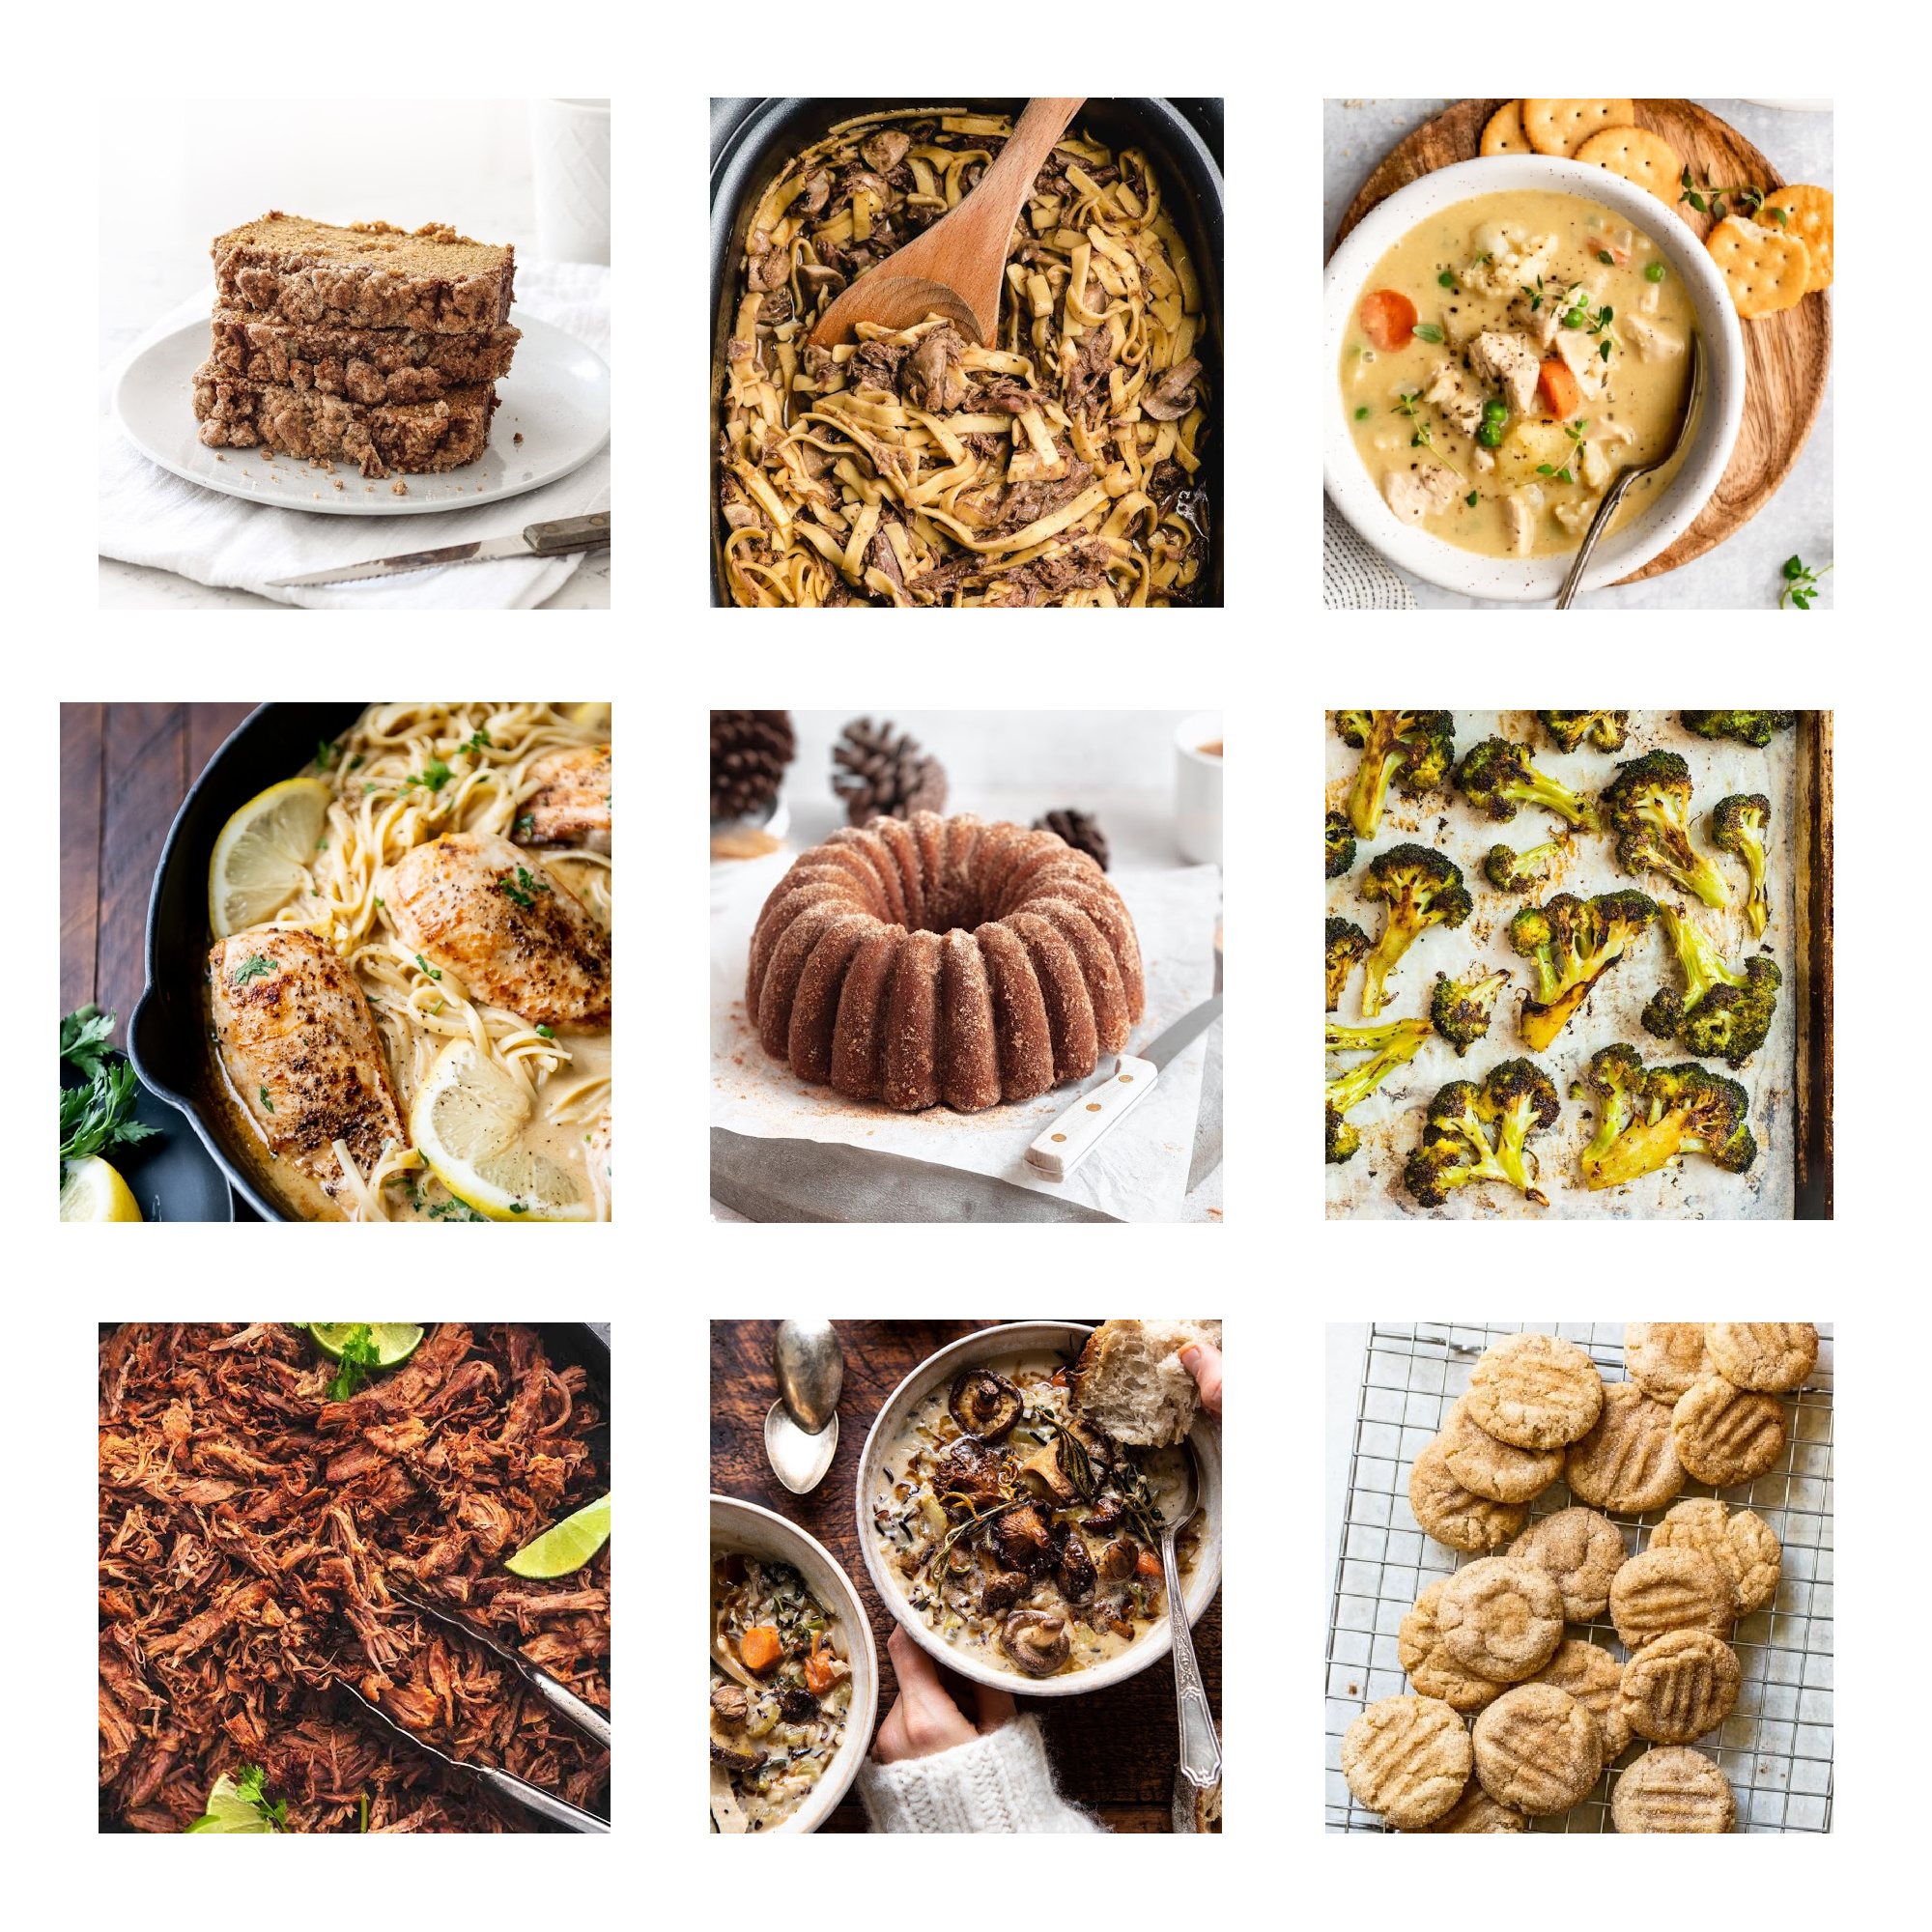 Get inspired in the kitchen with this menu of recipes featuring fall flavors and comfort food!